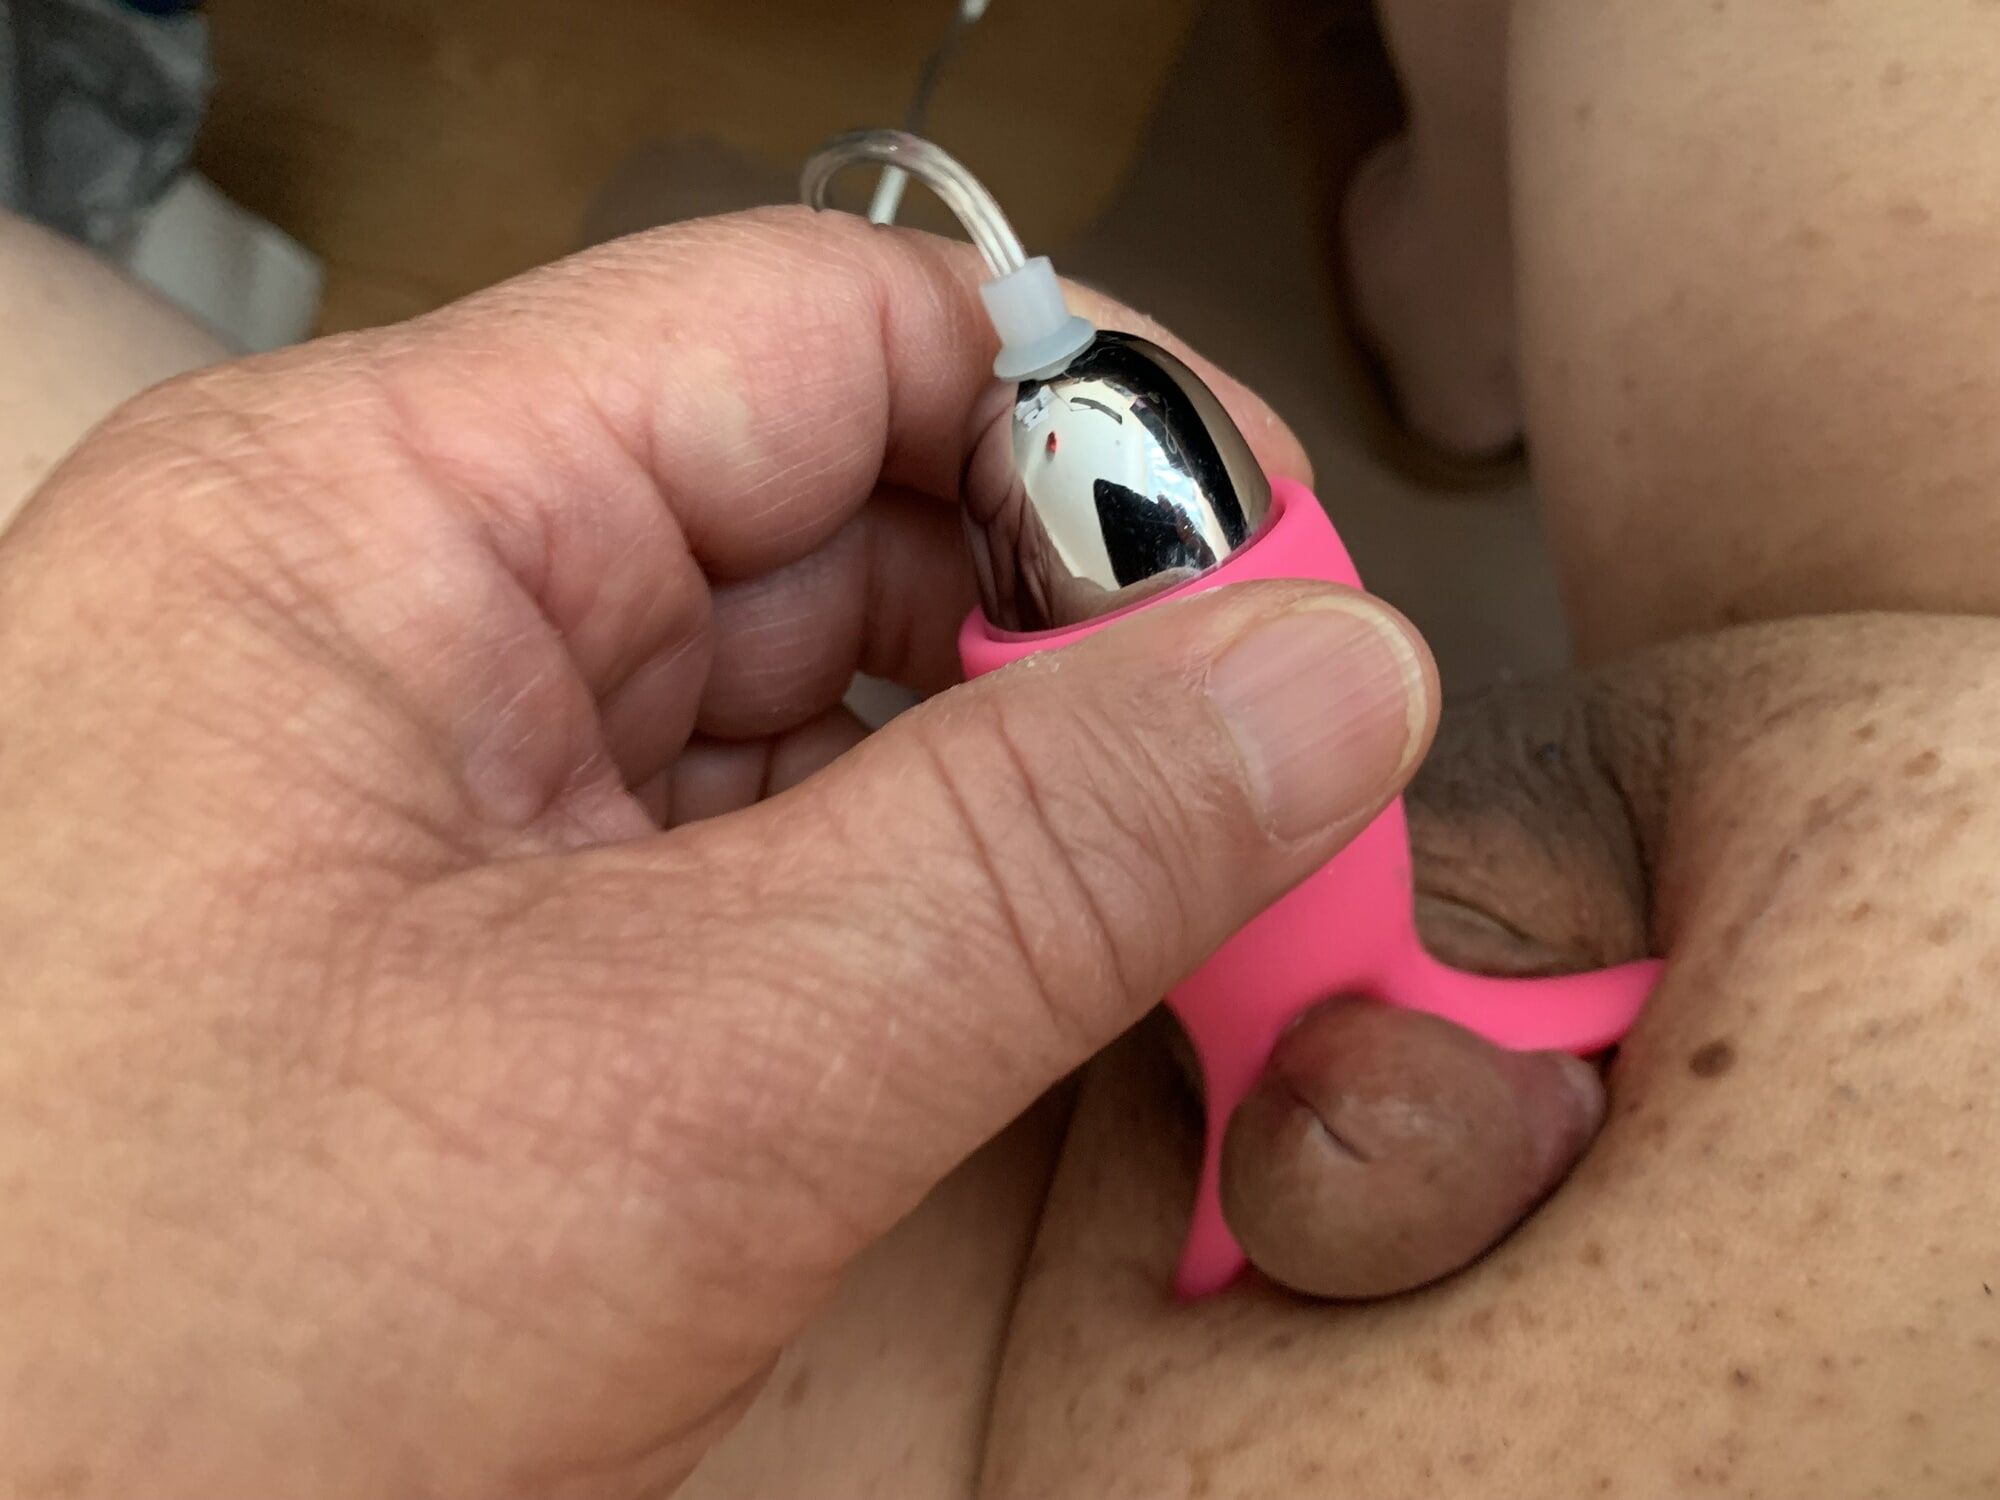 Edging small penis with clit vibrator #7